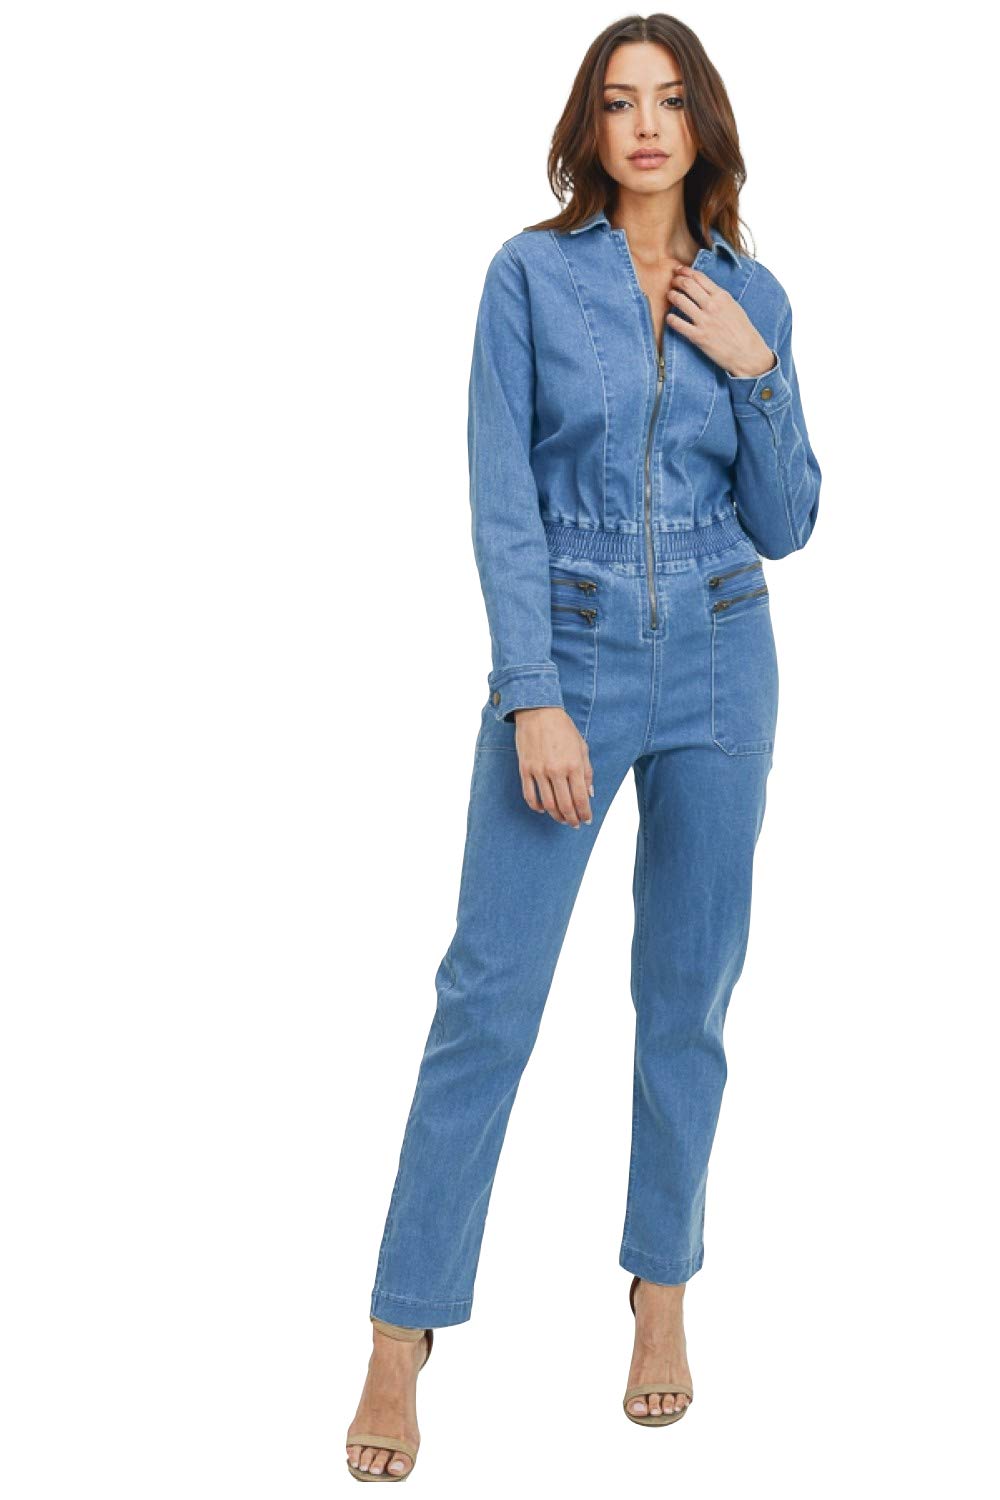 Long denim jumpsuit with long sleeves and zipper - Women